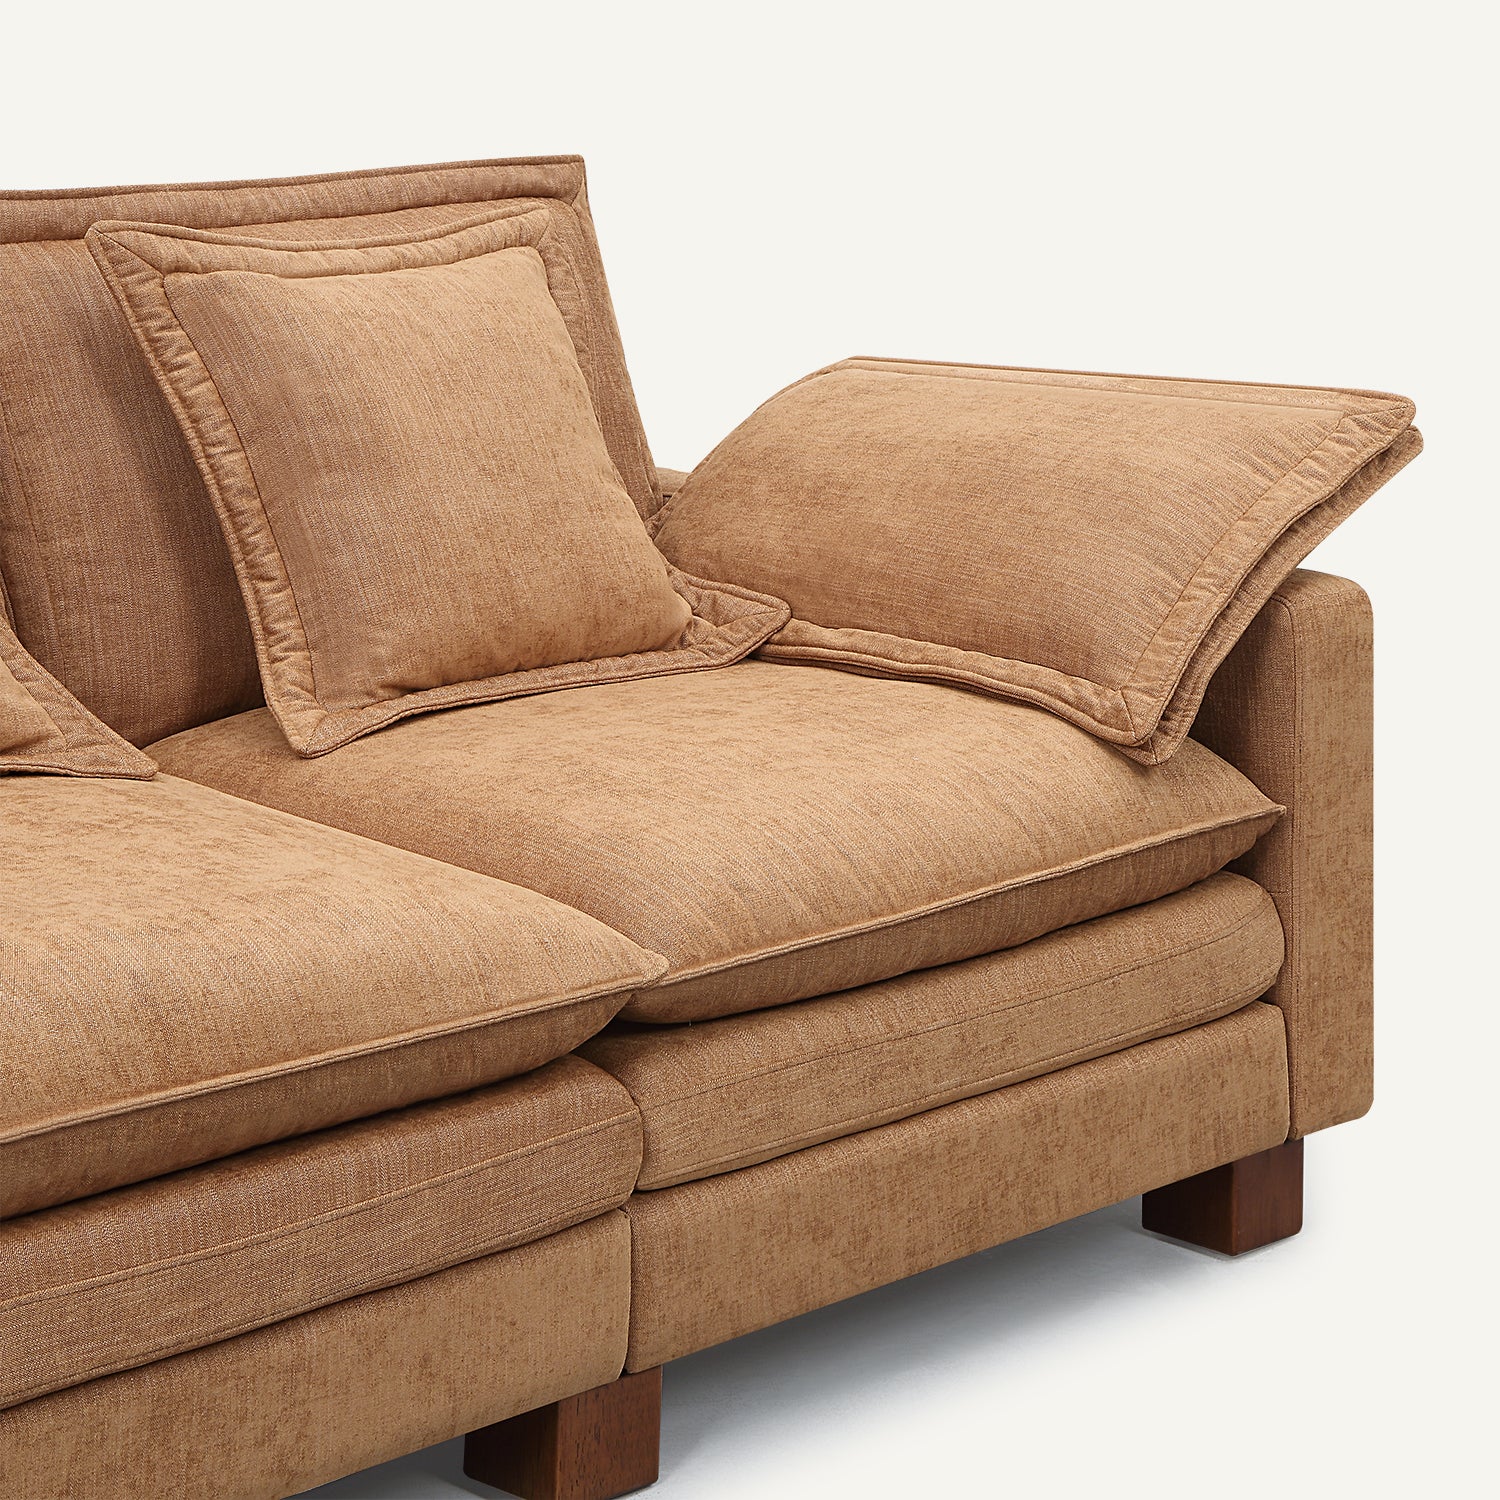 Stacked Tan Linen 4-Seat Sofa with Chaise